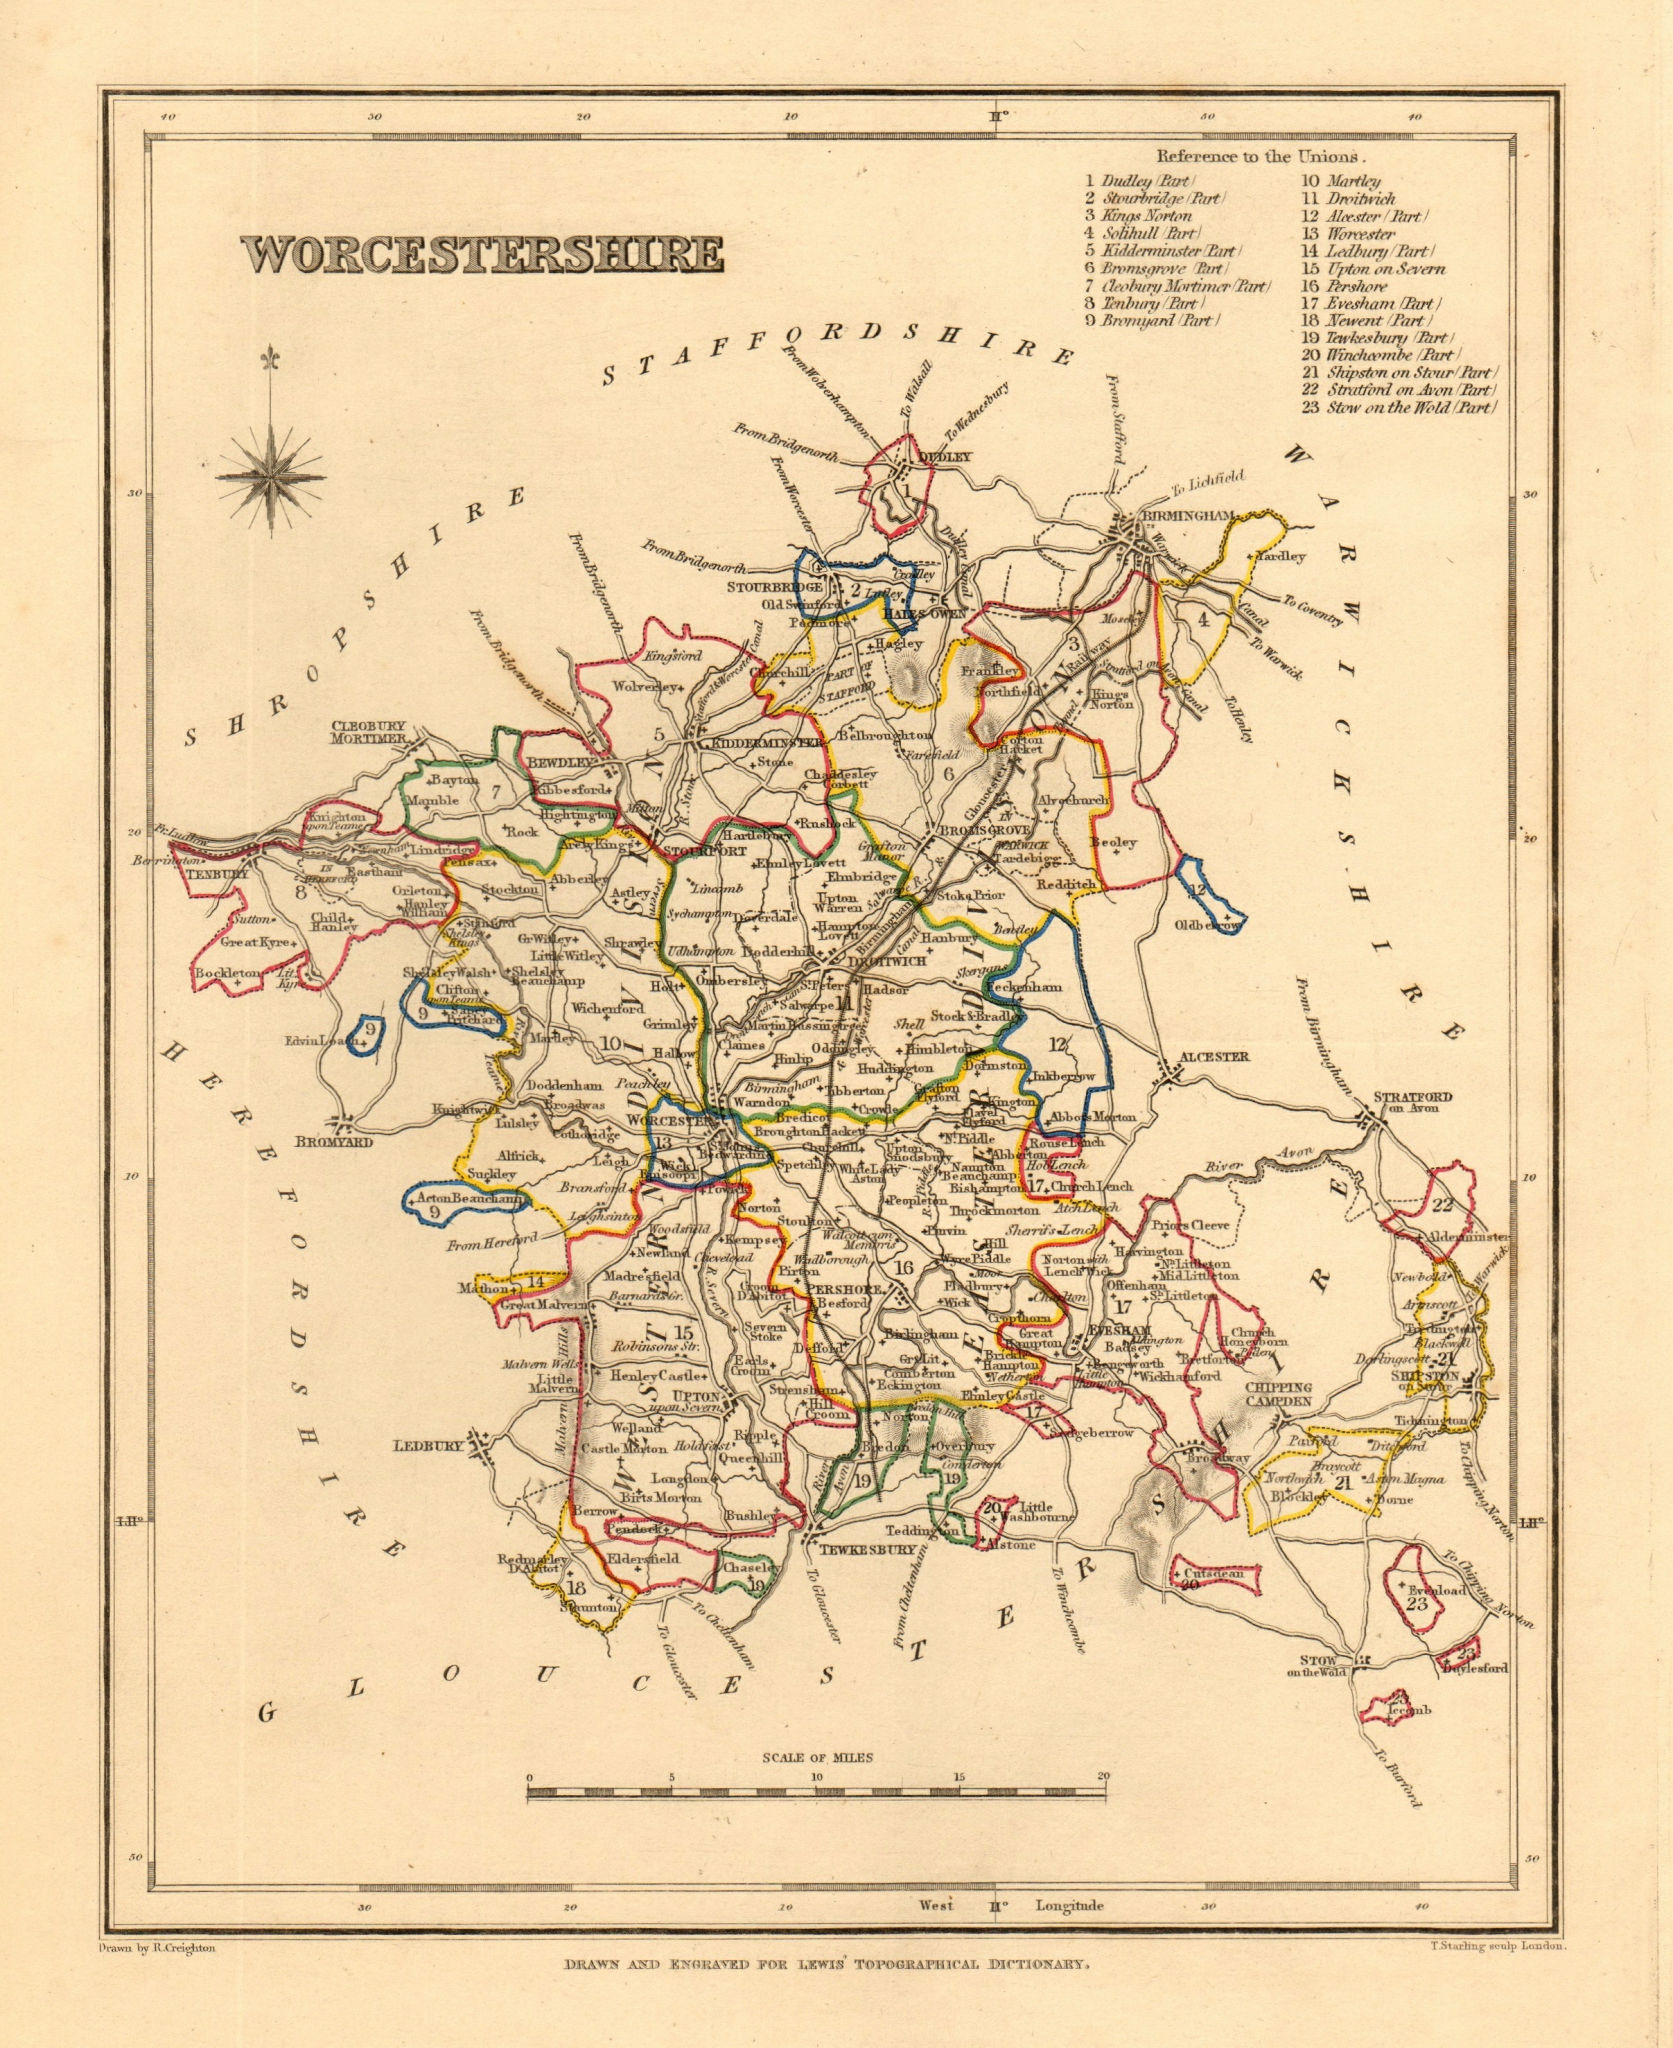 Associate Product Antique county map of WORCESTERSHIRE by Creighton & Starling for Lewis c1840